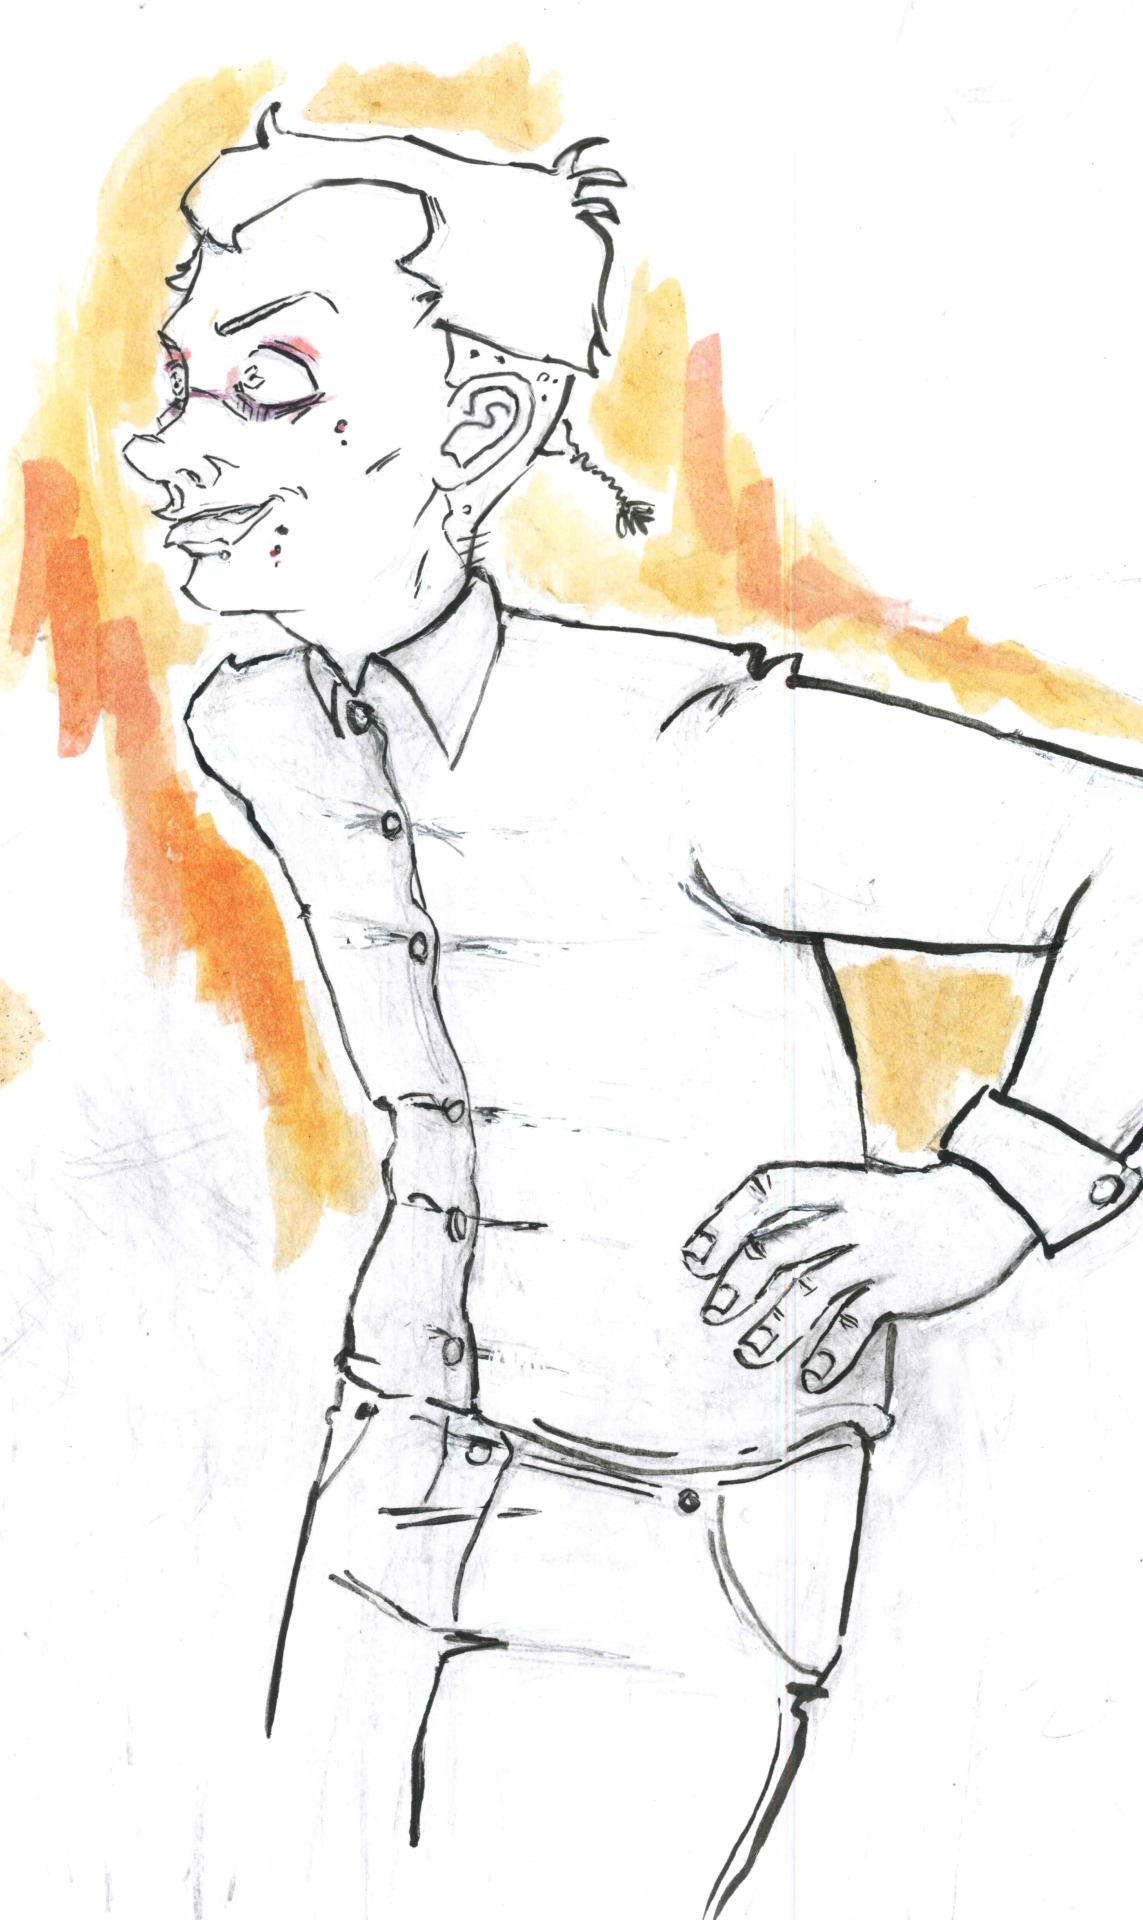 Here&rsquo;s another ink and watercolor sketching of the smug and nasty Rick